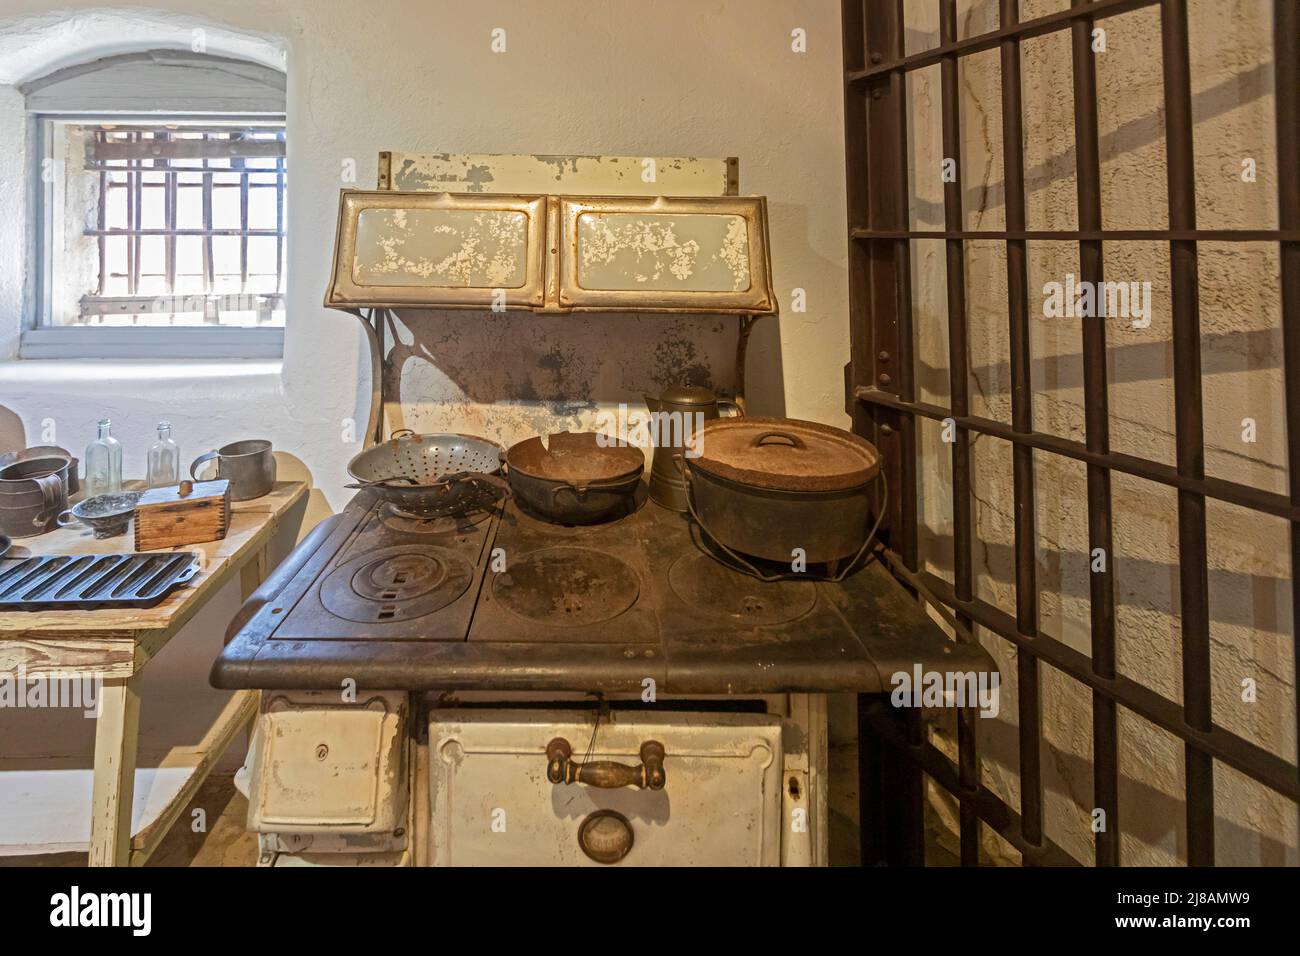 Tahlequah, Oklahoma - The jail kitchen at the Cherokee National Prison Museum. The building was used as a jail from 1875 until the 1970s. Stock Photo